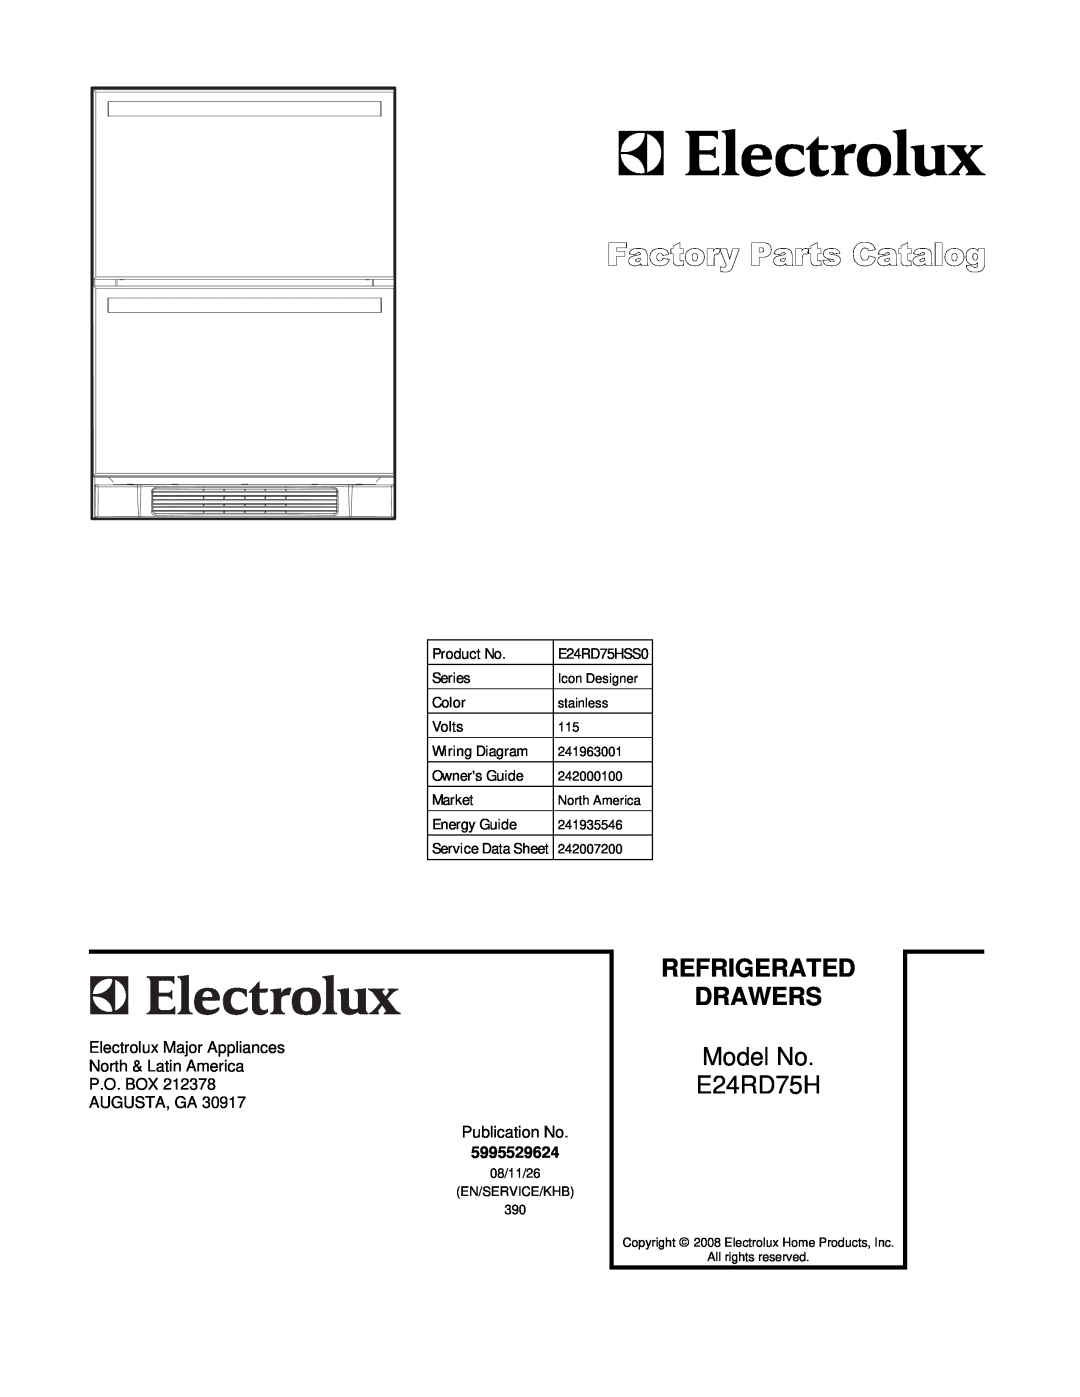 Electrolux E24RD75HSS0 manual Refrigerated Drawers, Model No E24RD75H 